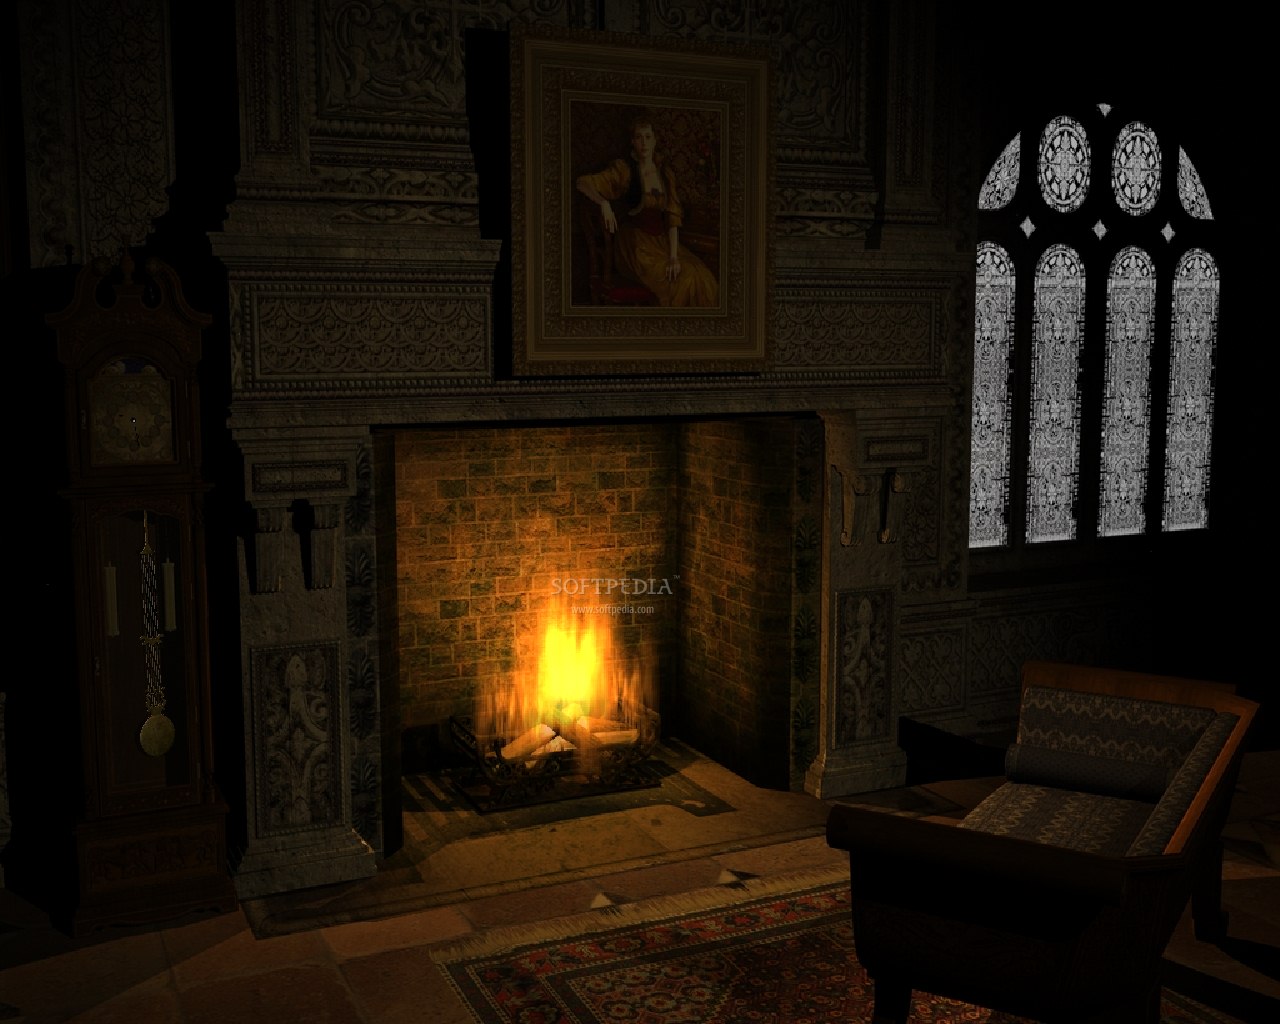 Old Fireplace Animated Wallpaper This Is The Image That Will Be